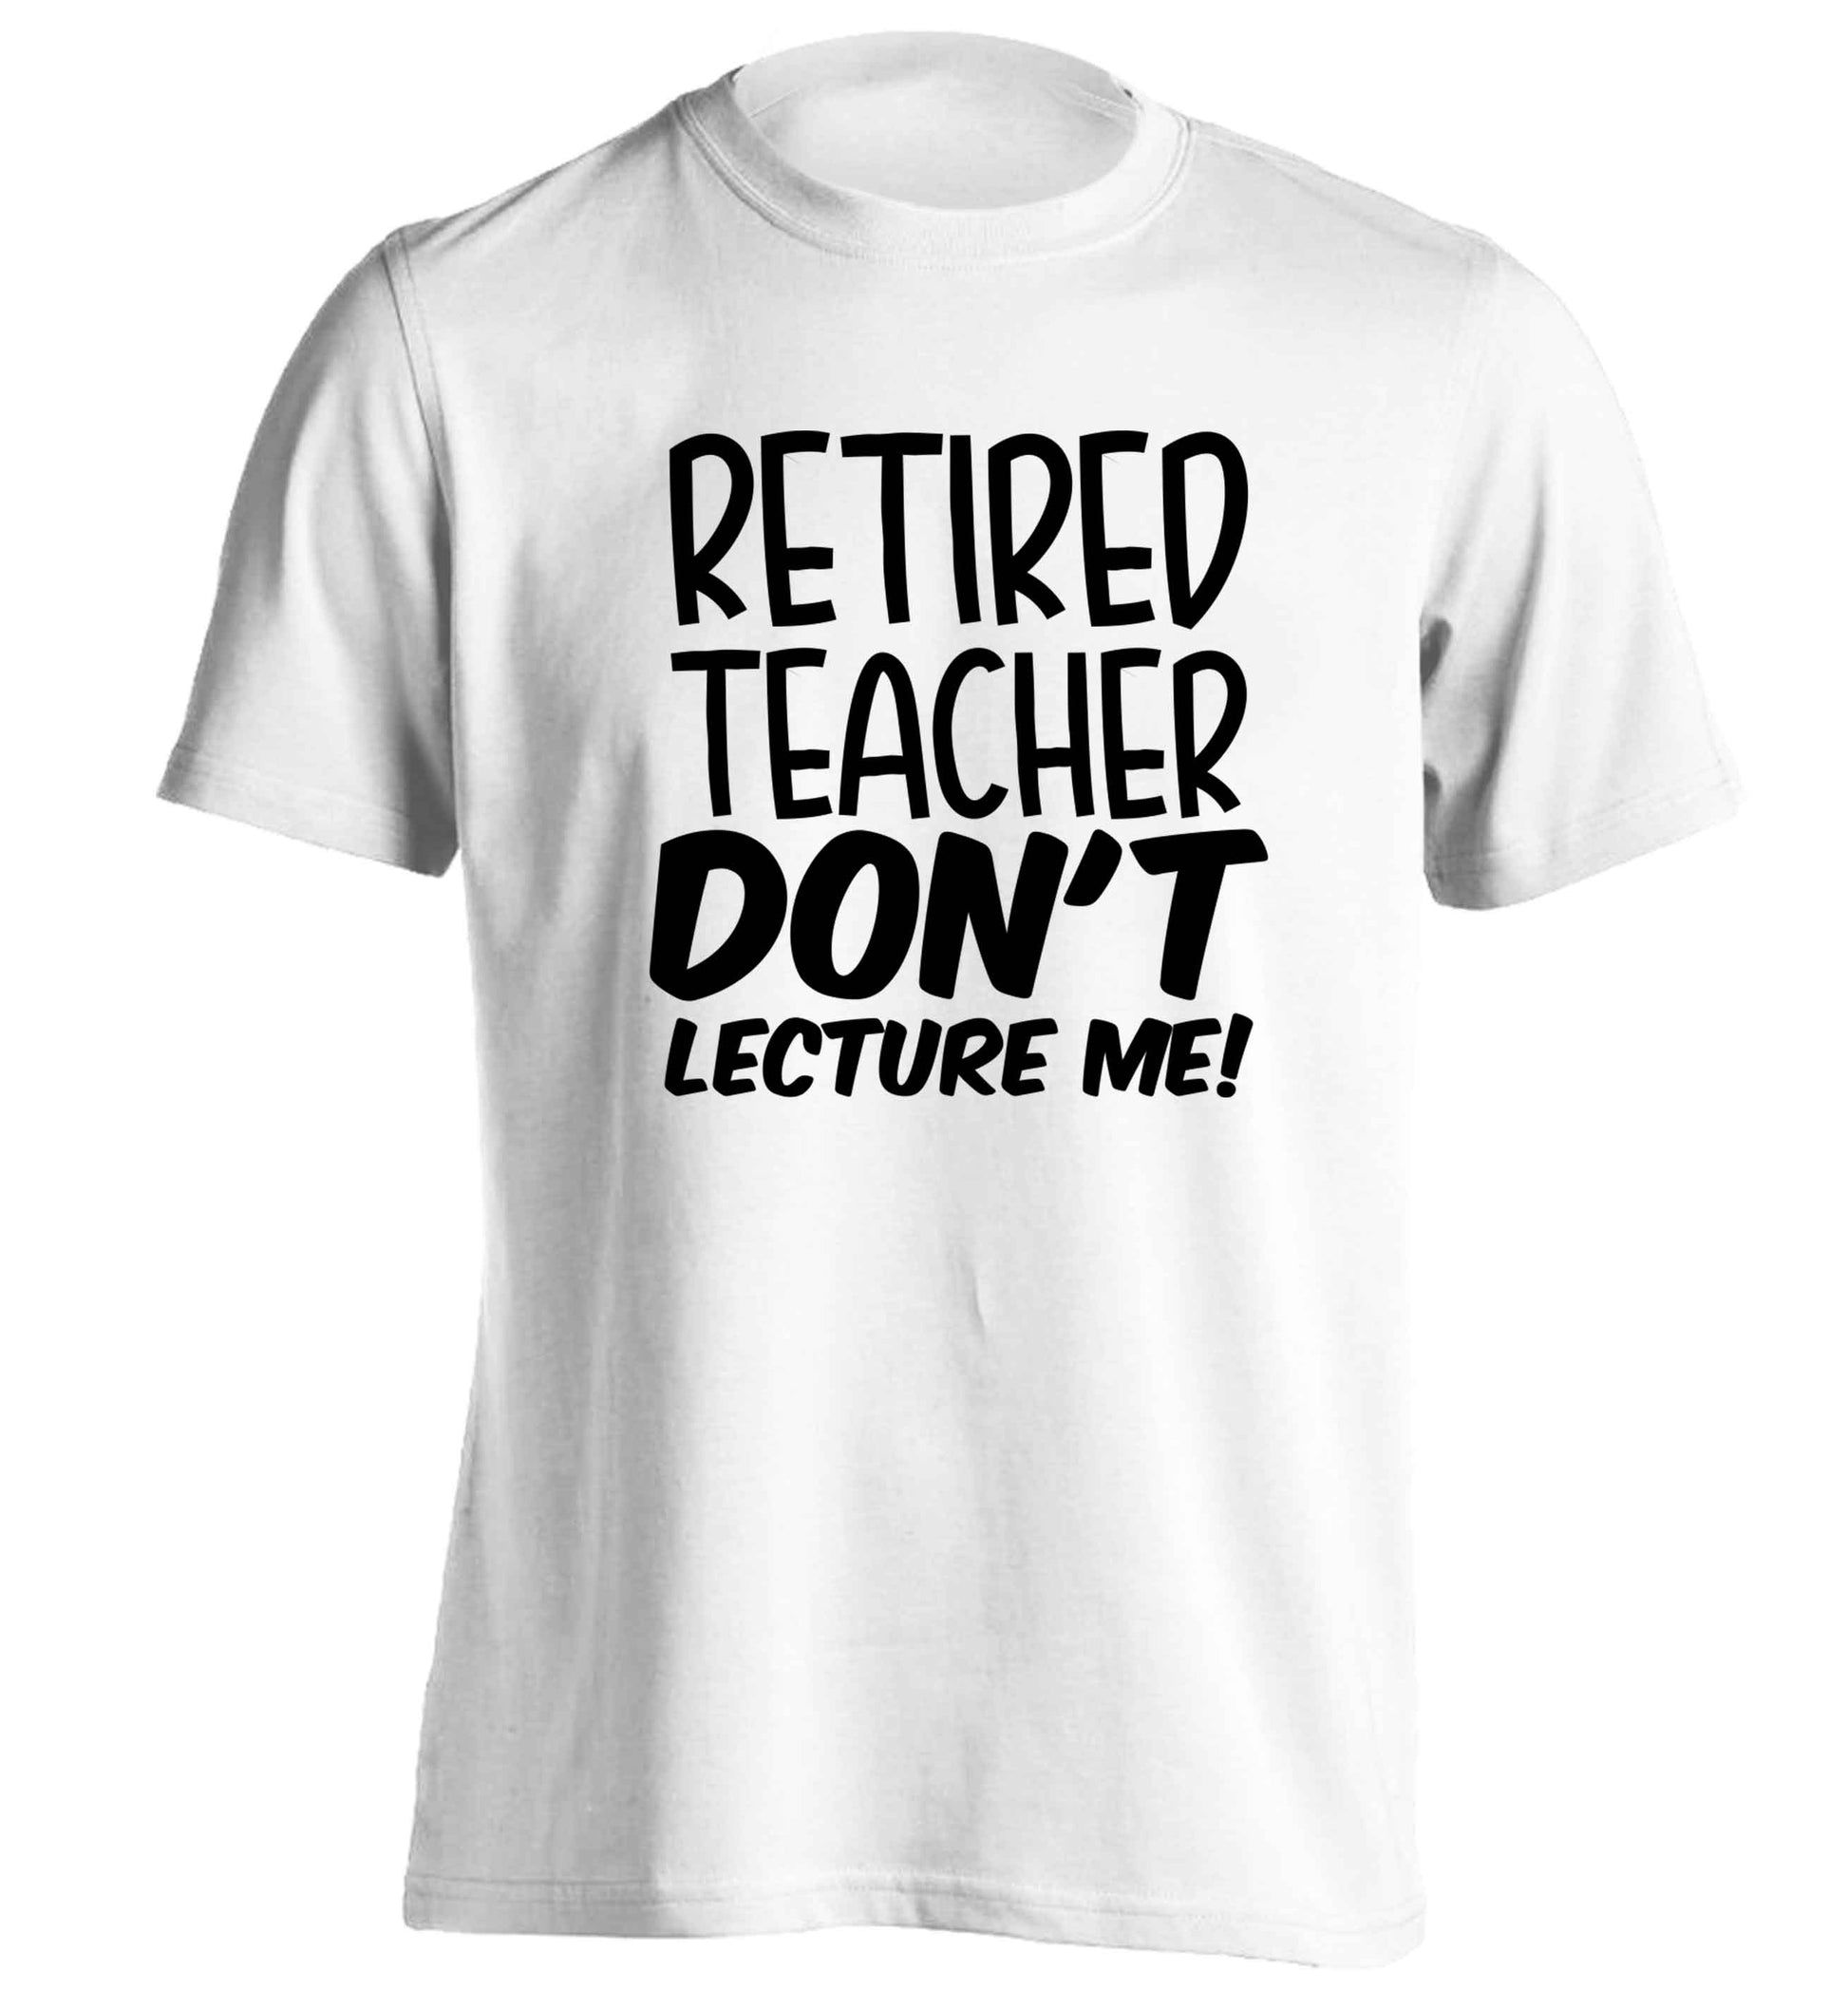 Retired teacher don't lecture me! adults unisex white Tshirt 2XL